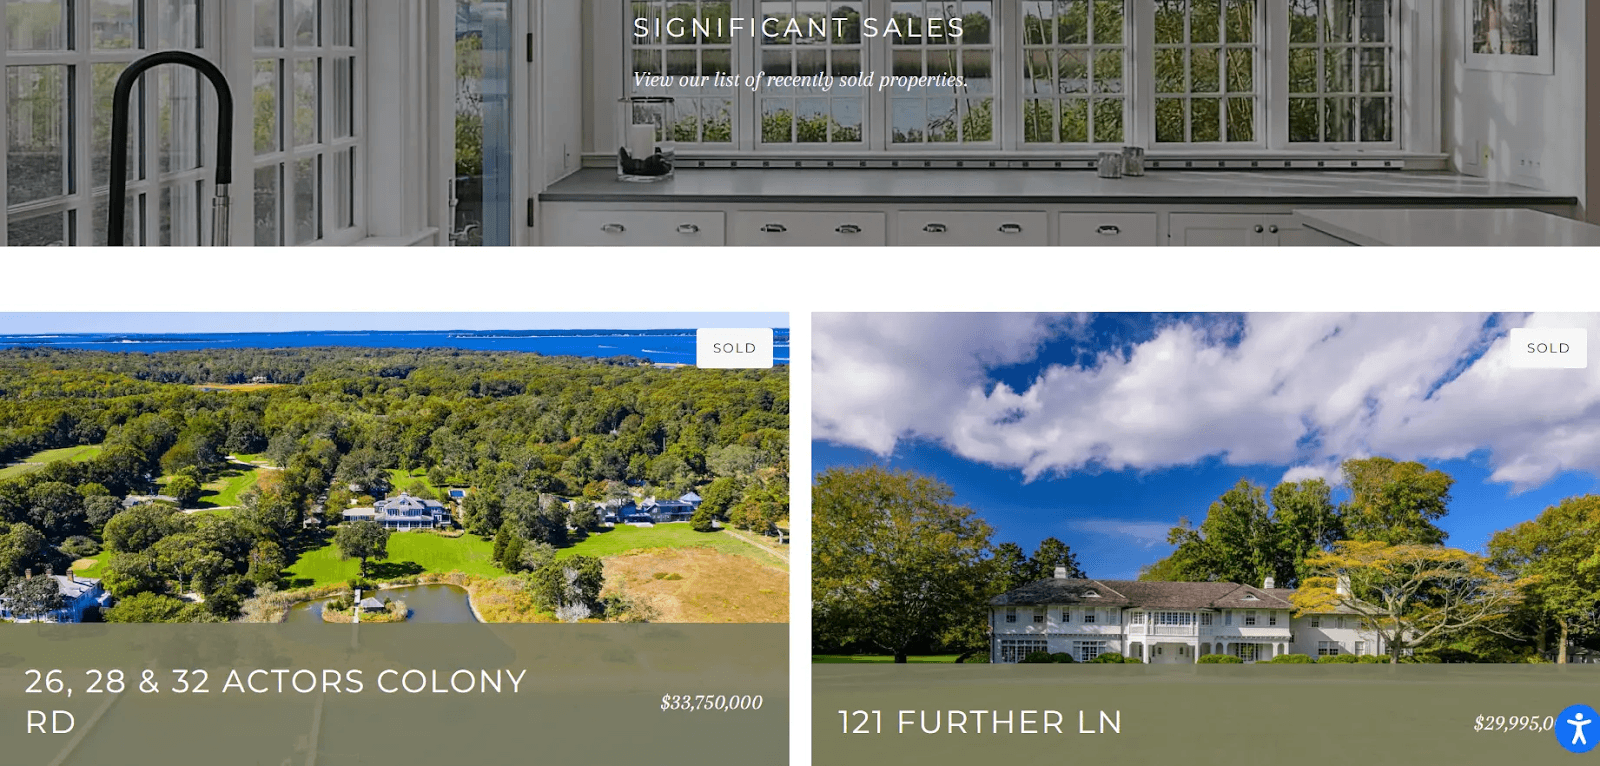 Real estate website example